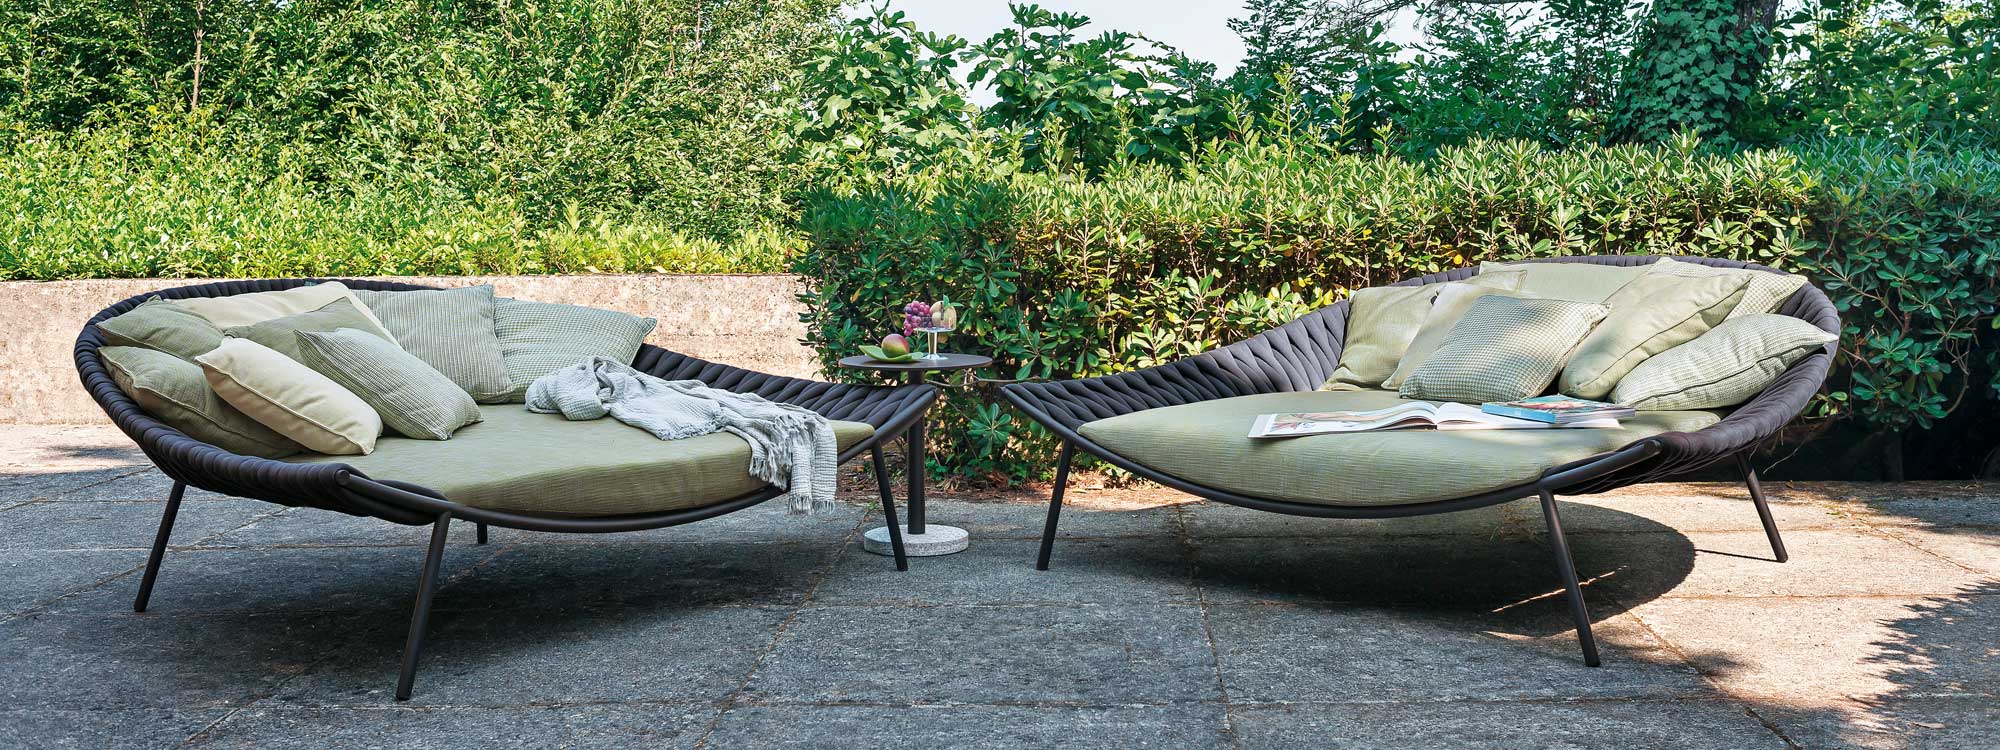 Arena modern garden daybed is a modular outdoor day bed in high quality outdoor furniture materials by RODA luxury outdoor furniture